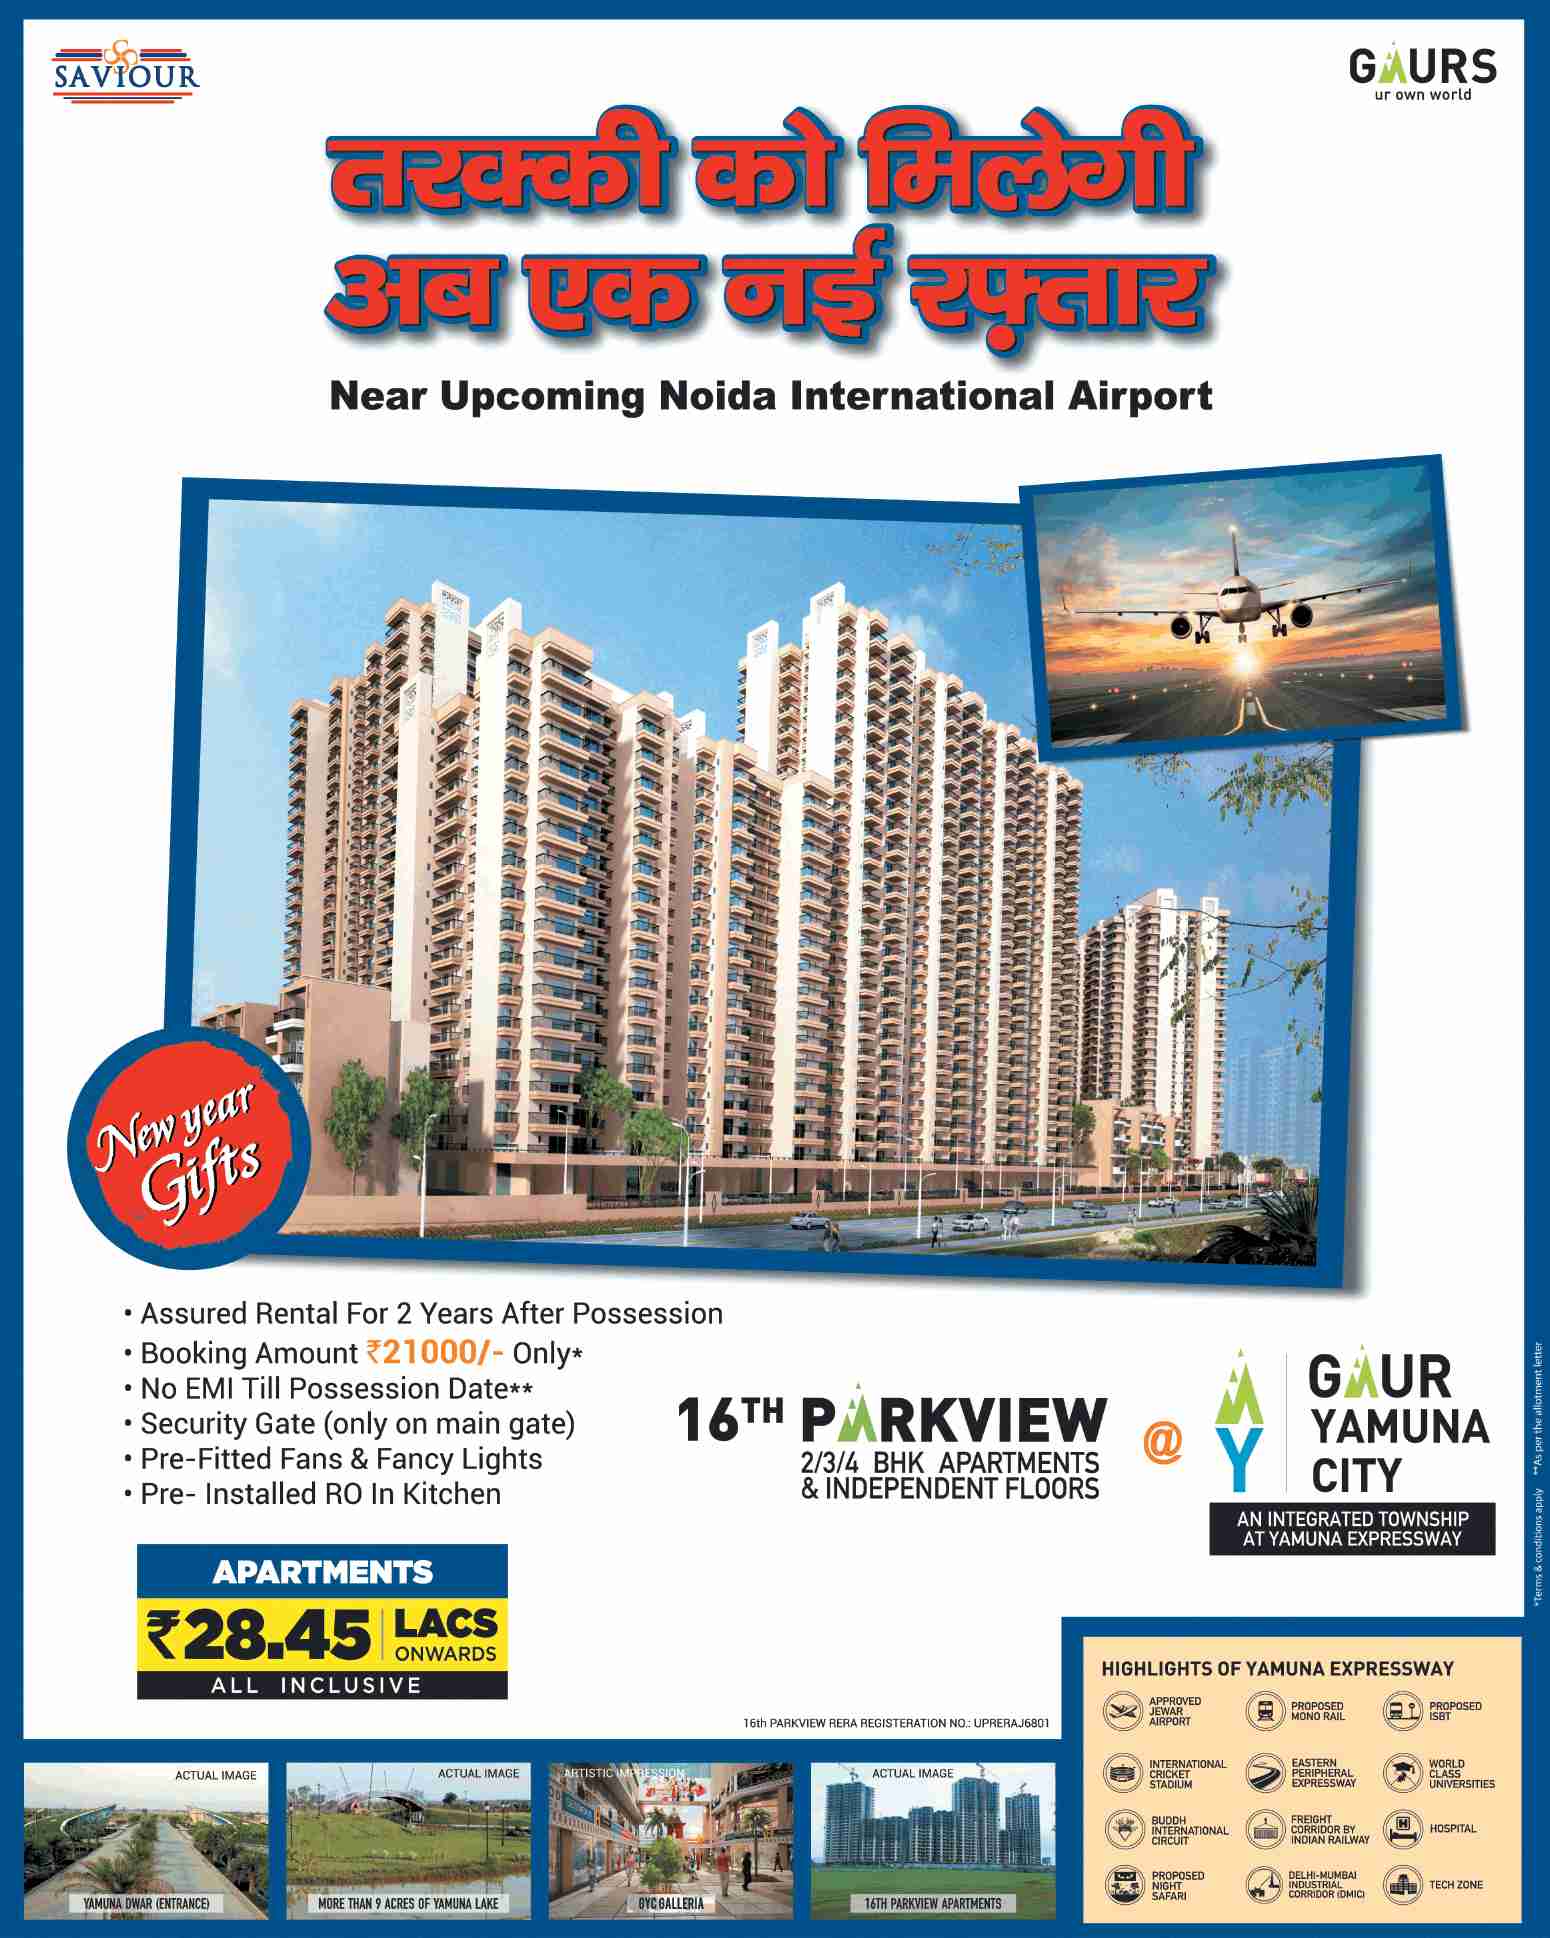 Avail assured return for 2 years after possession at Gaur 16th Parkview in Greater Noida